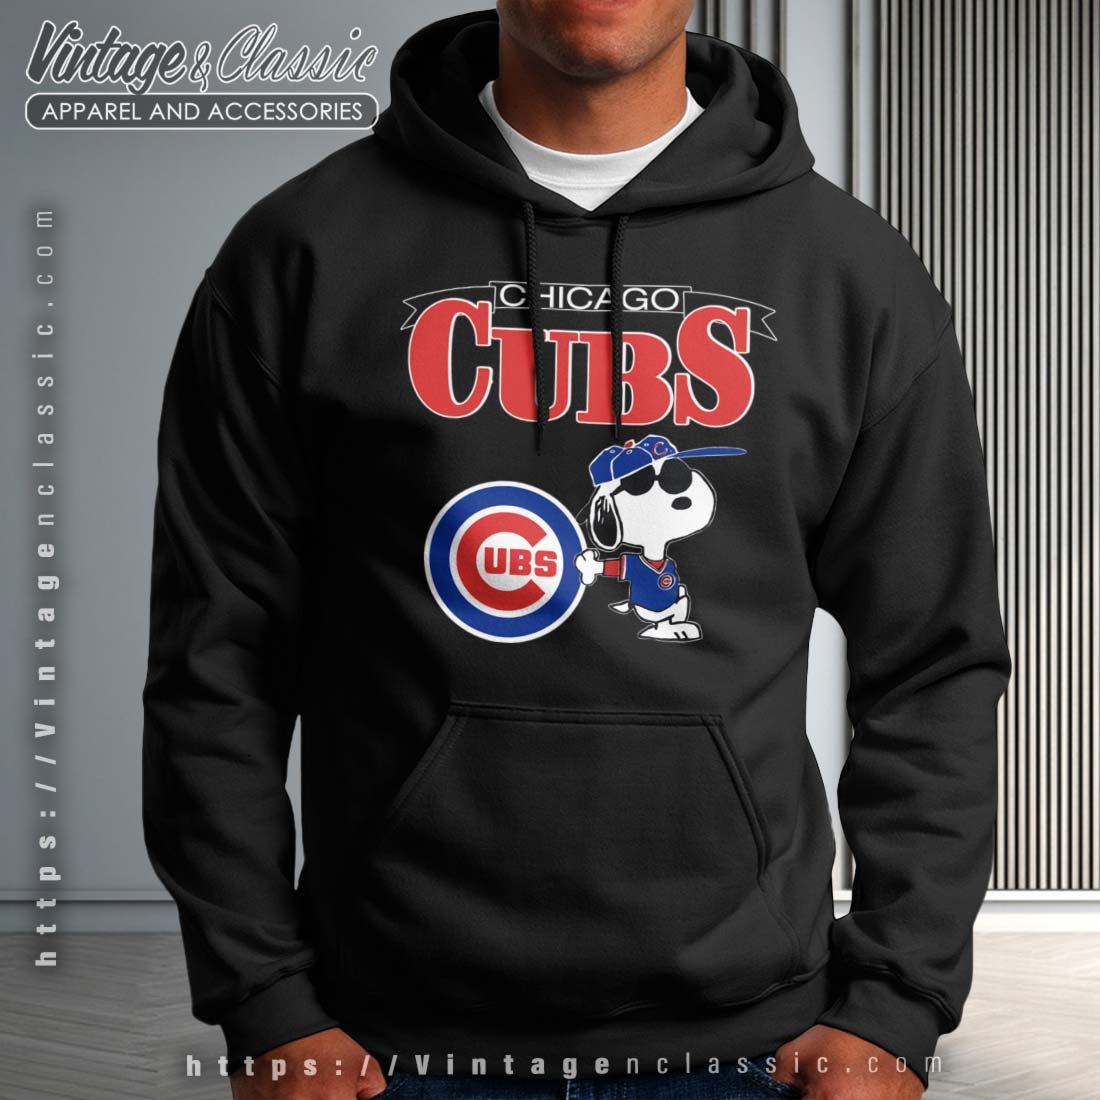 Snoopy Chicago Cubs Tshirts, Funny Cubs T Shirt Gift For MLB Fans